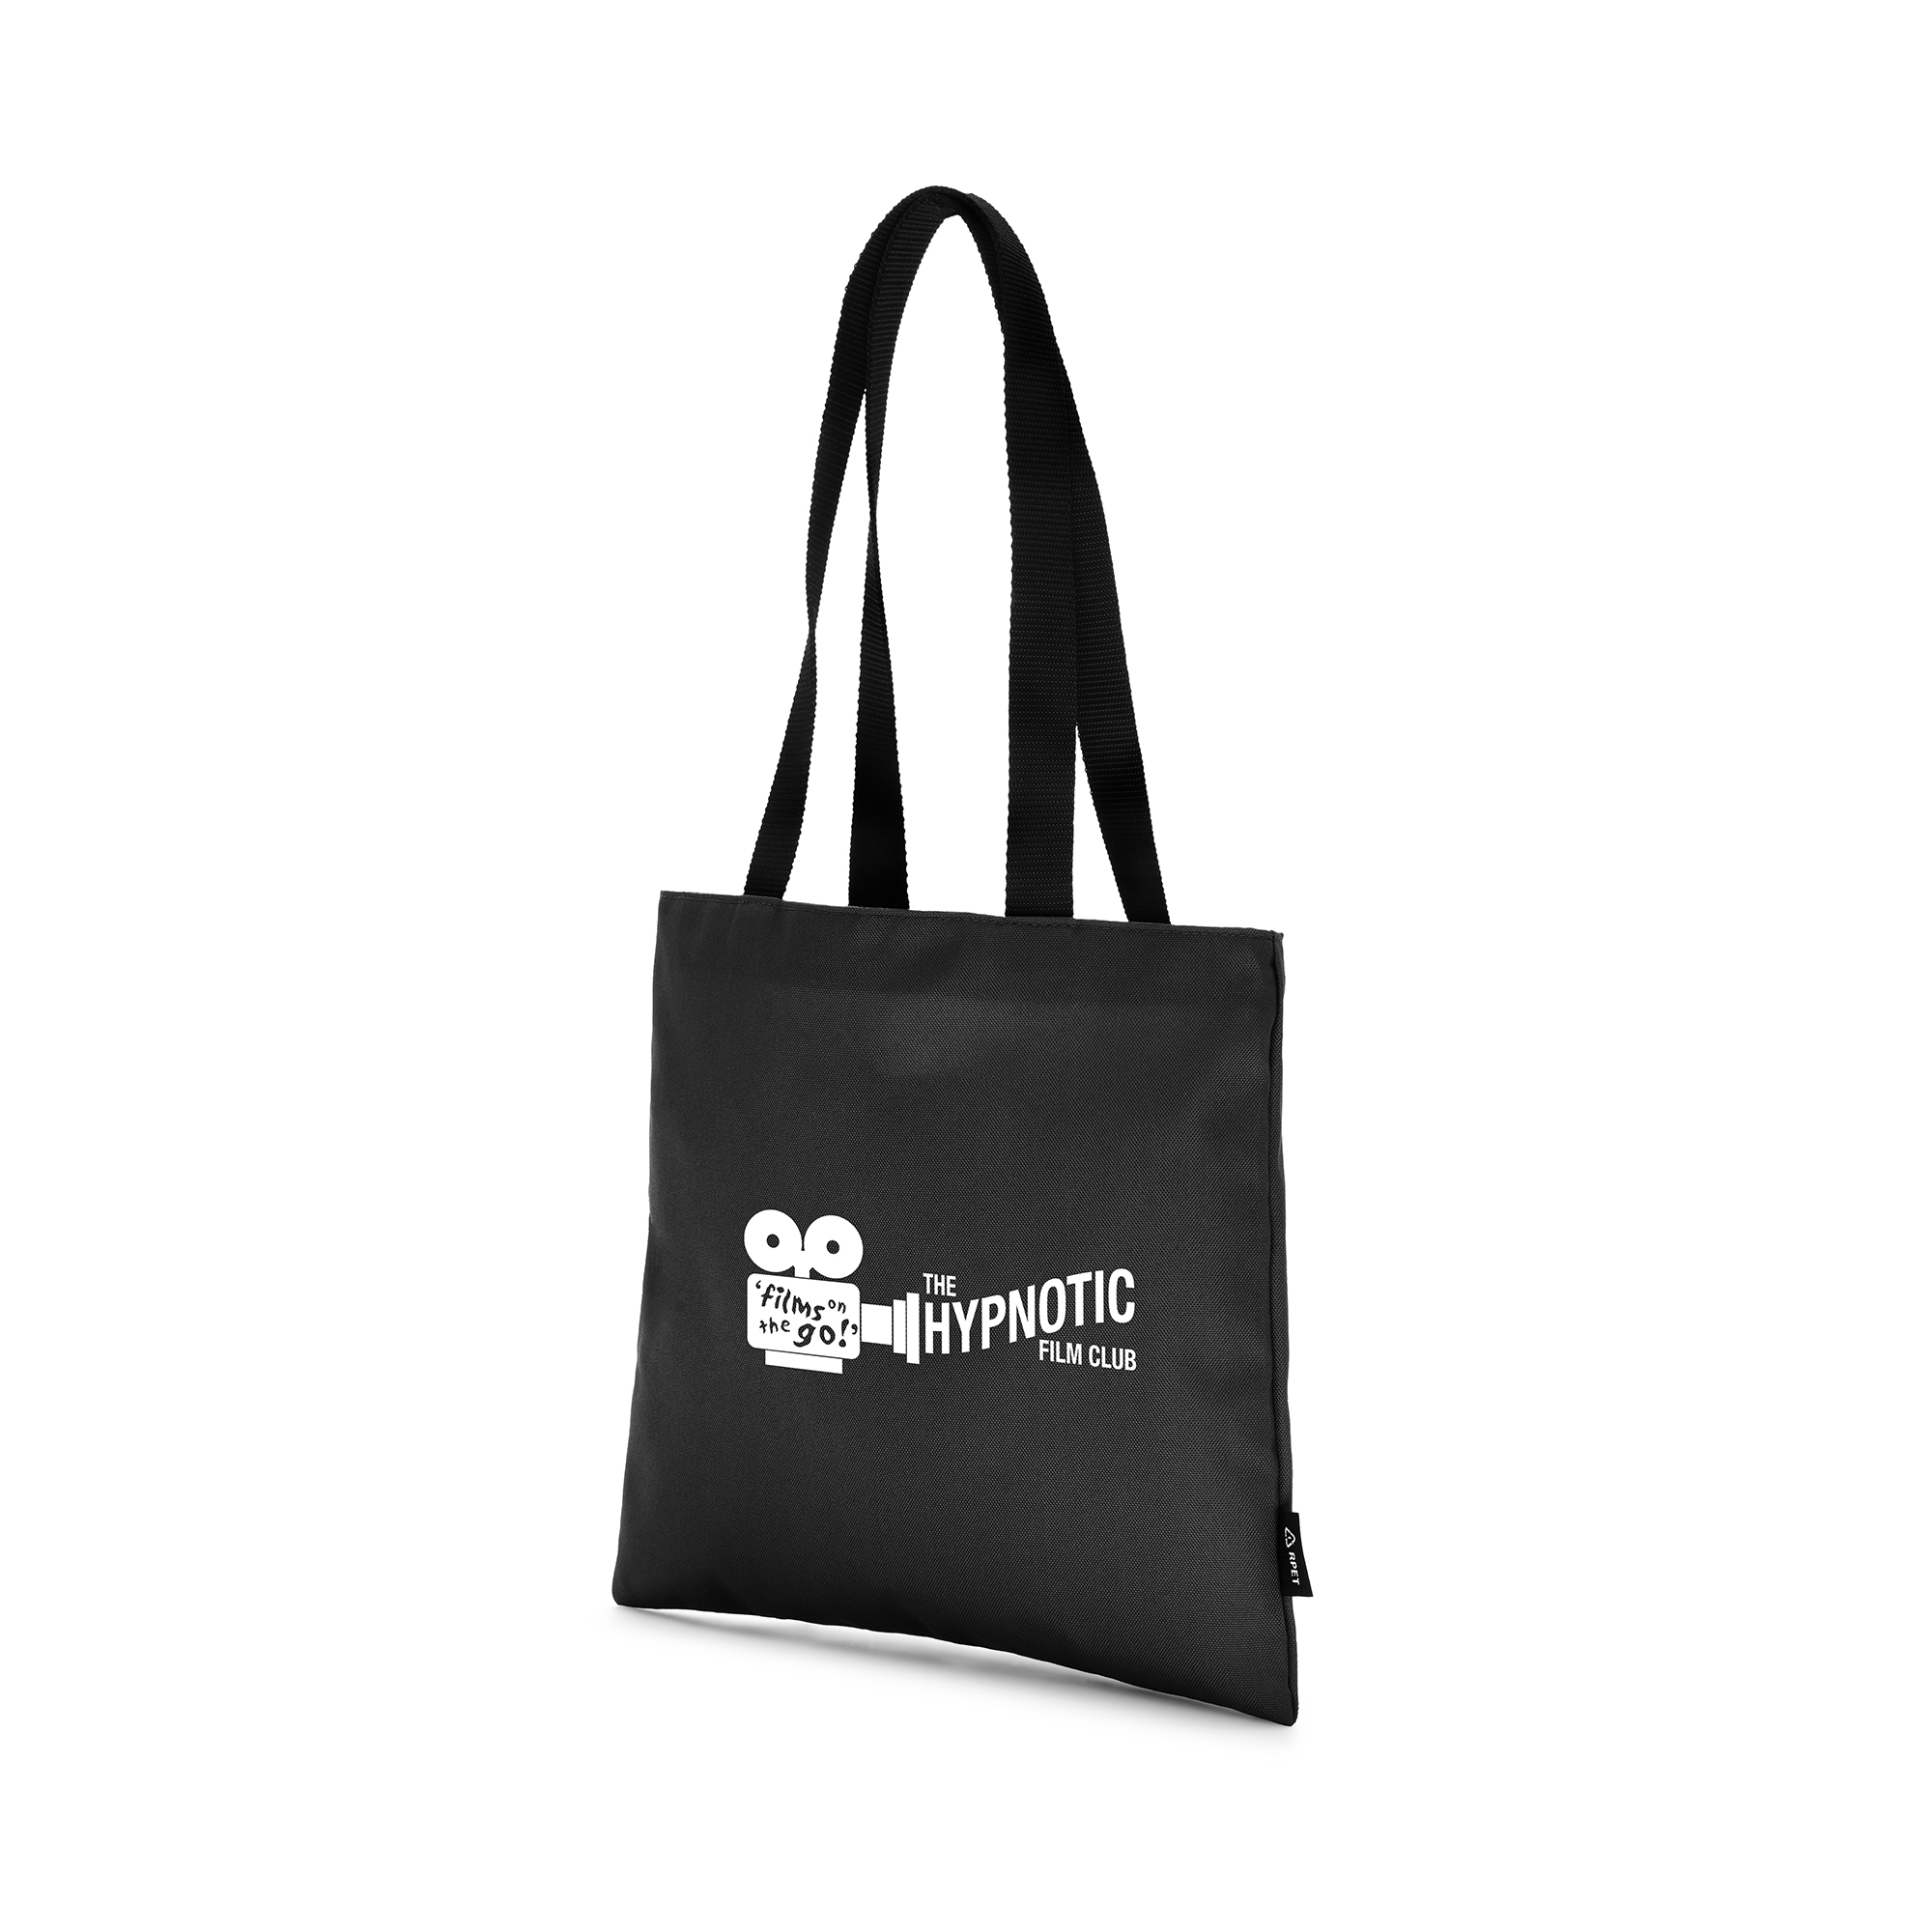 Recycled 600D RPET shopper bag with strong polyester webbed handles and a small inner side pocket with 2 compartments.